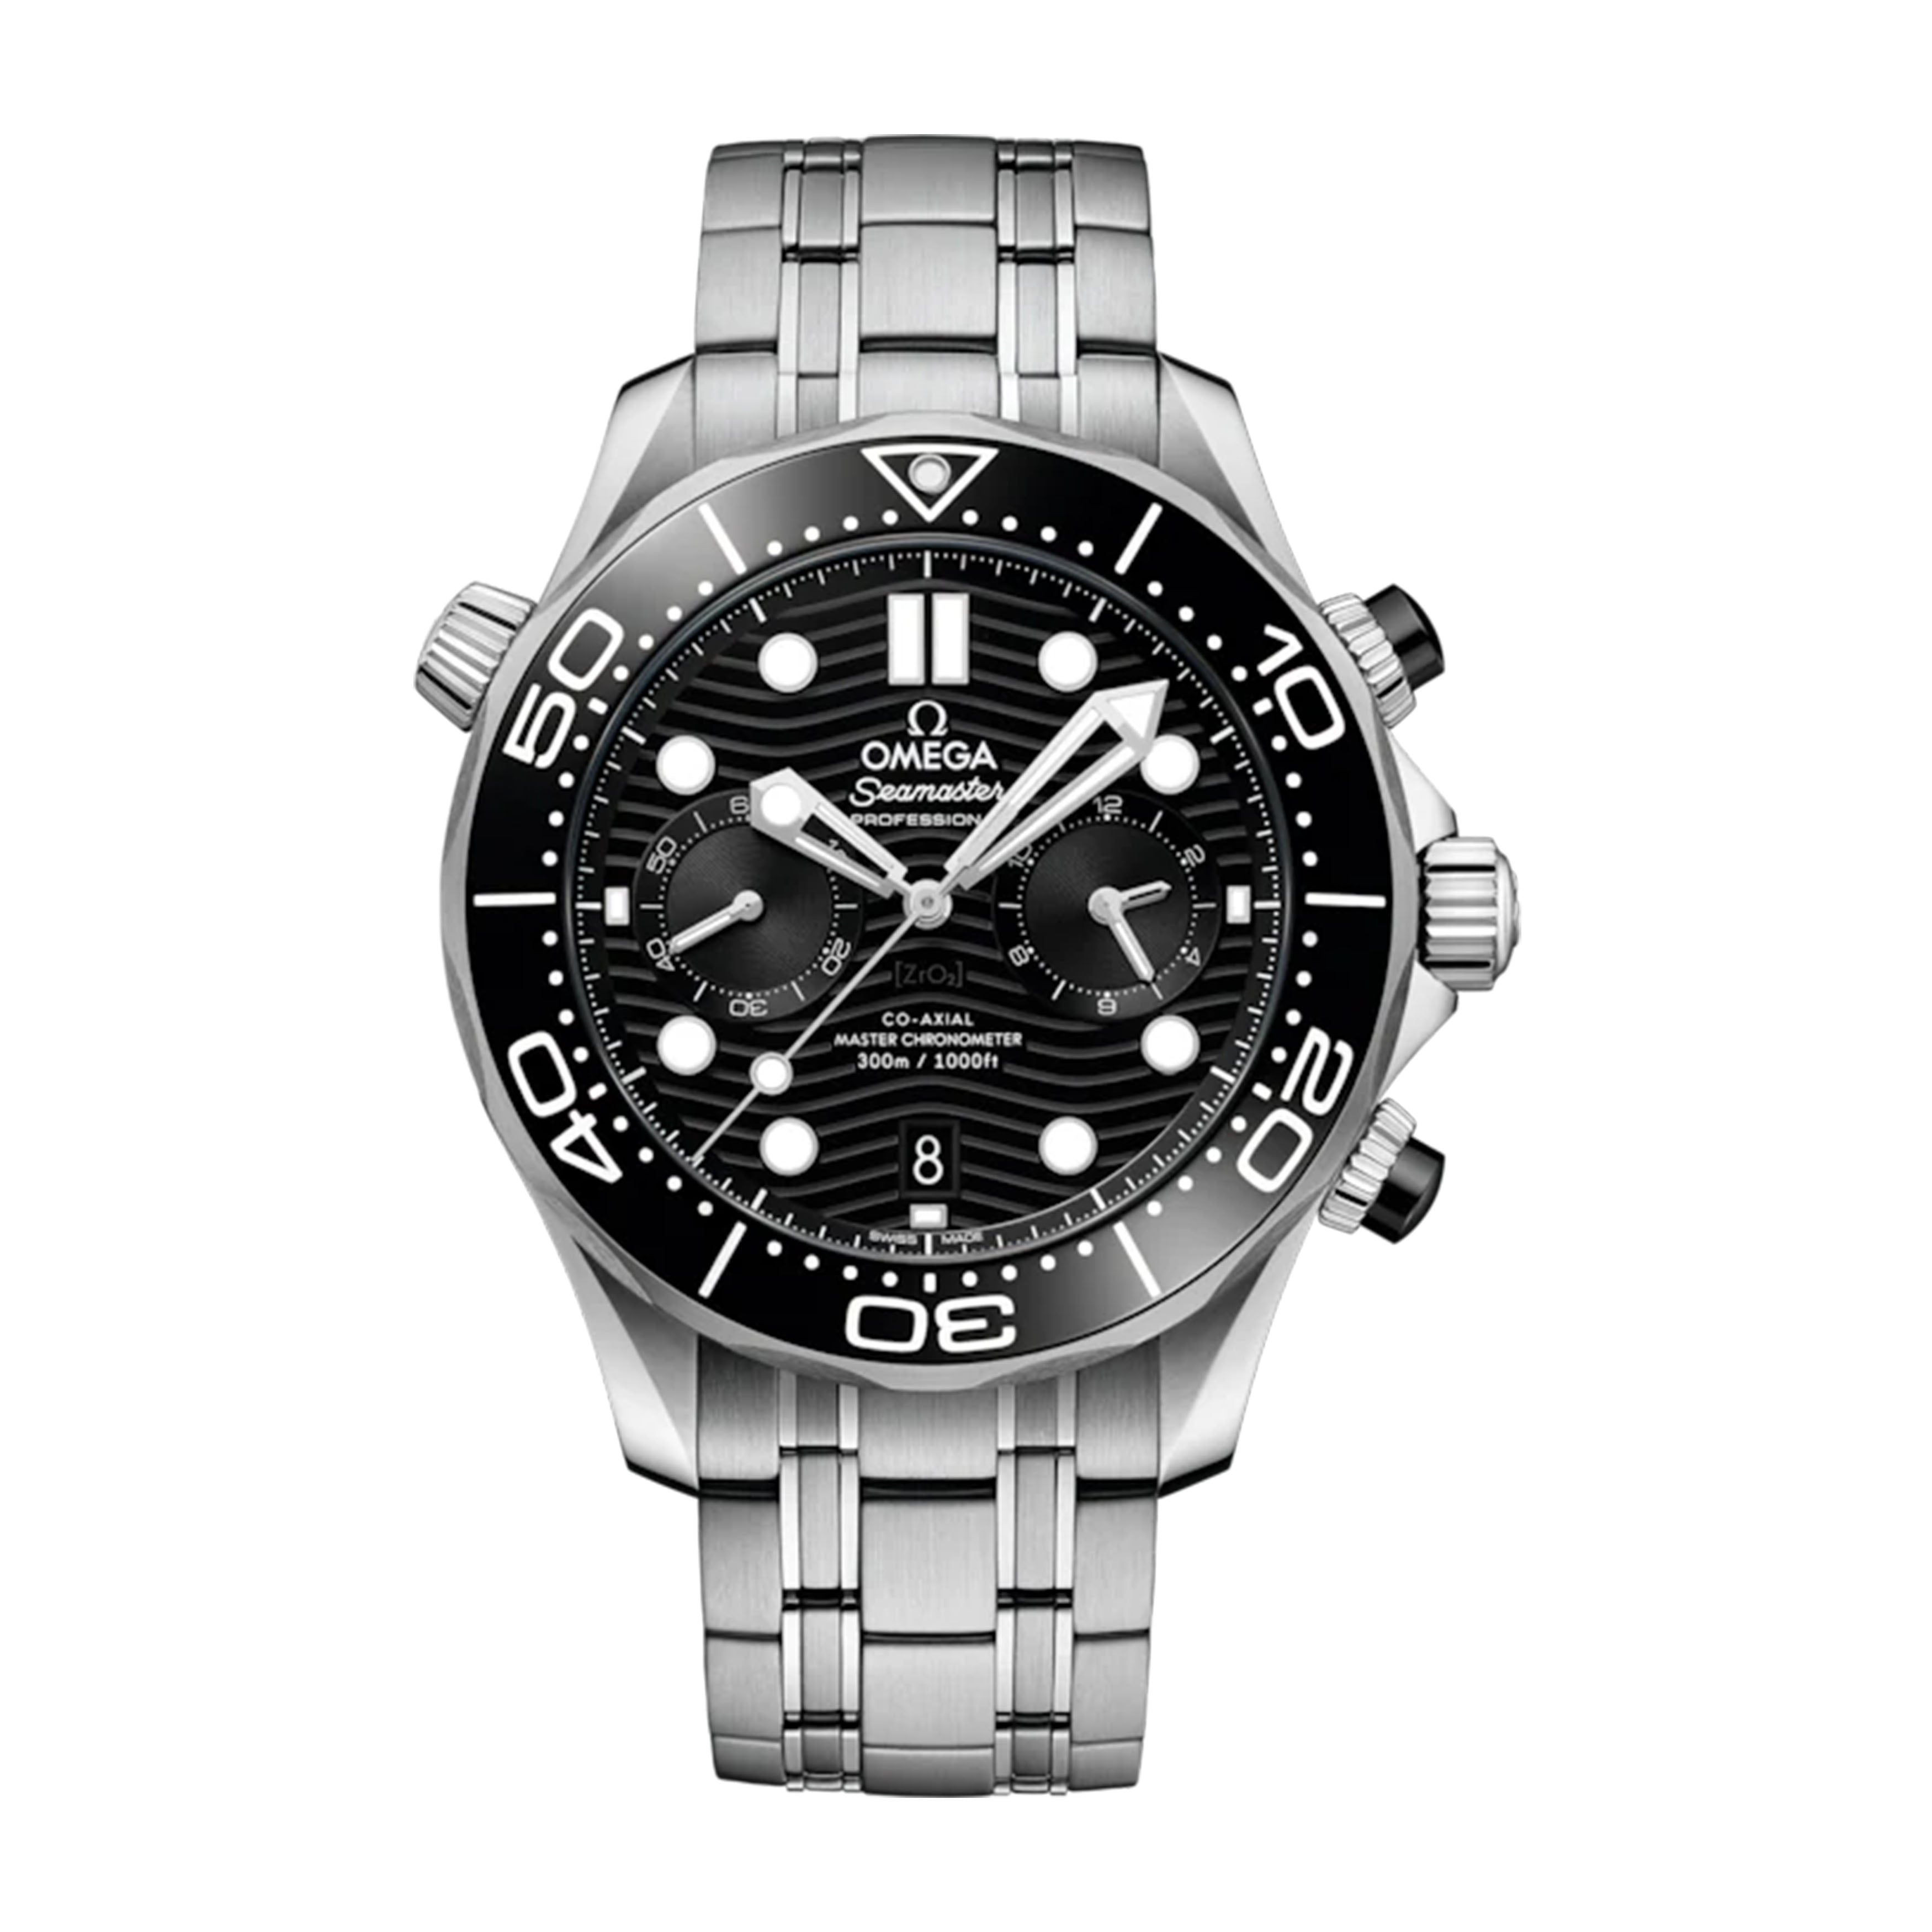 Omega Seamaster Diver 300m Chronograph Watch, 44mm Black Dial, 210.30.44.51.01.001